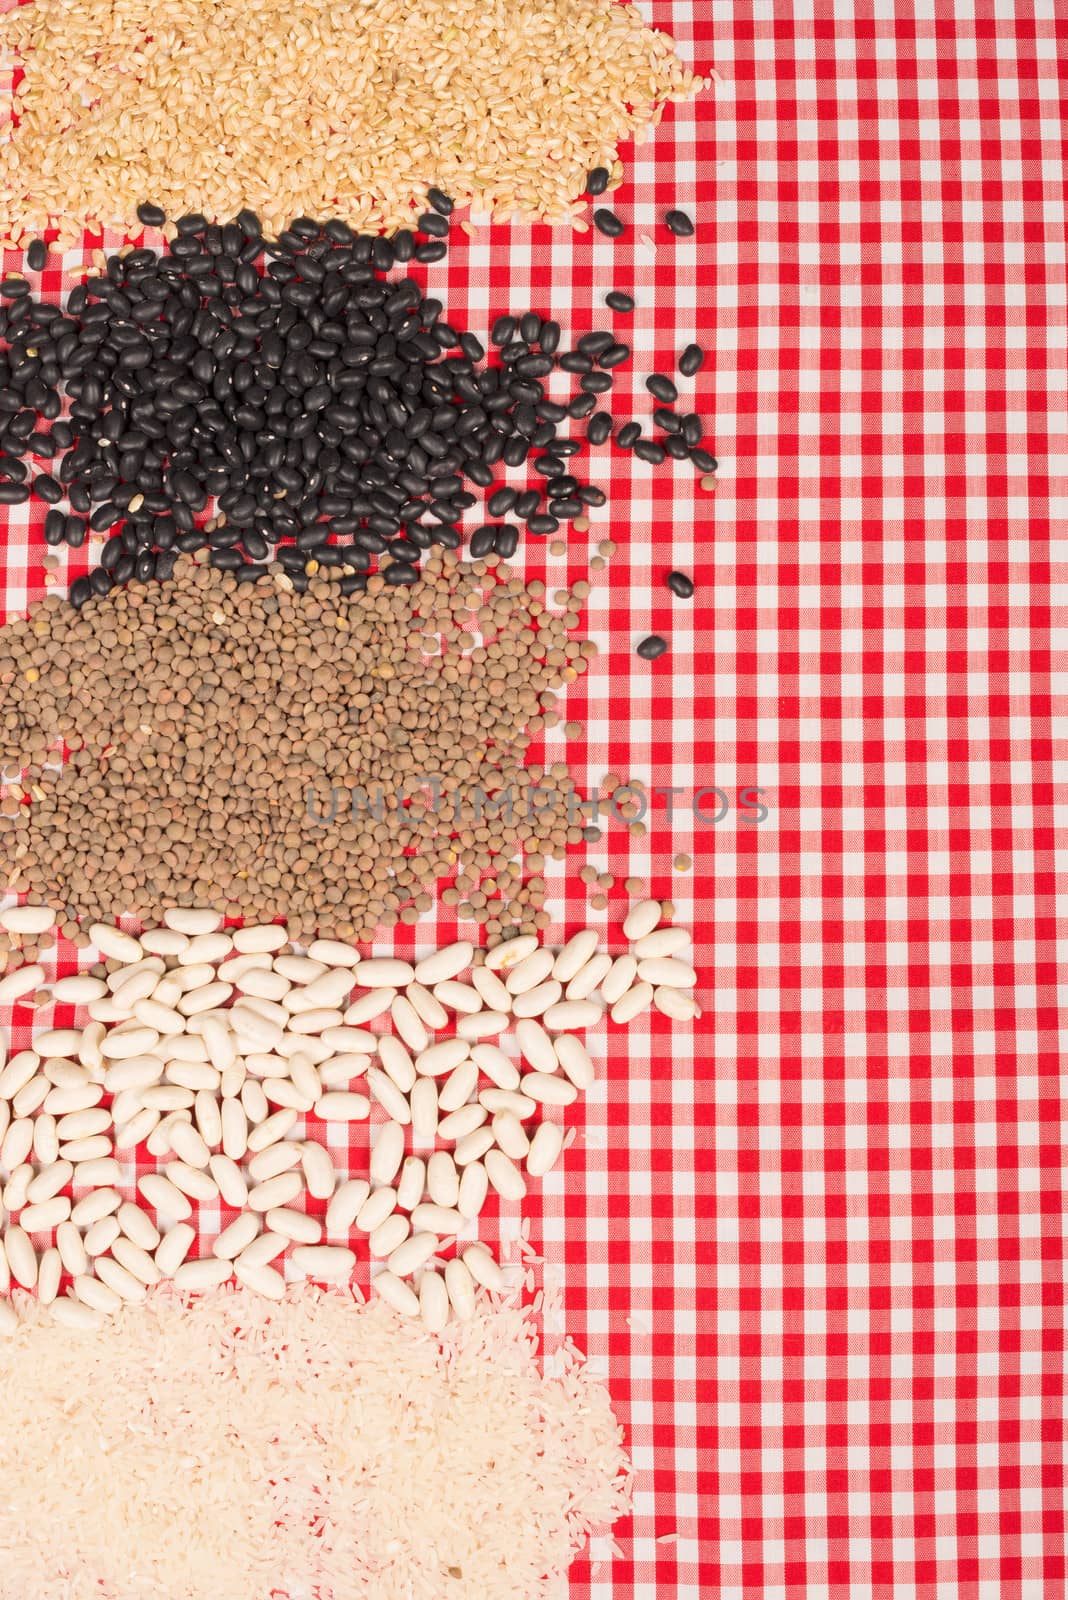 Legume set on a checkered red and white tablecloth